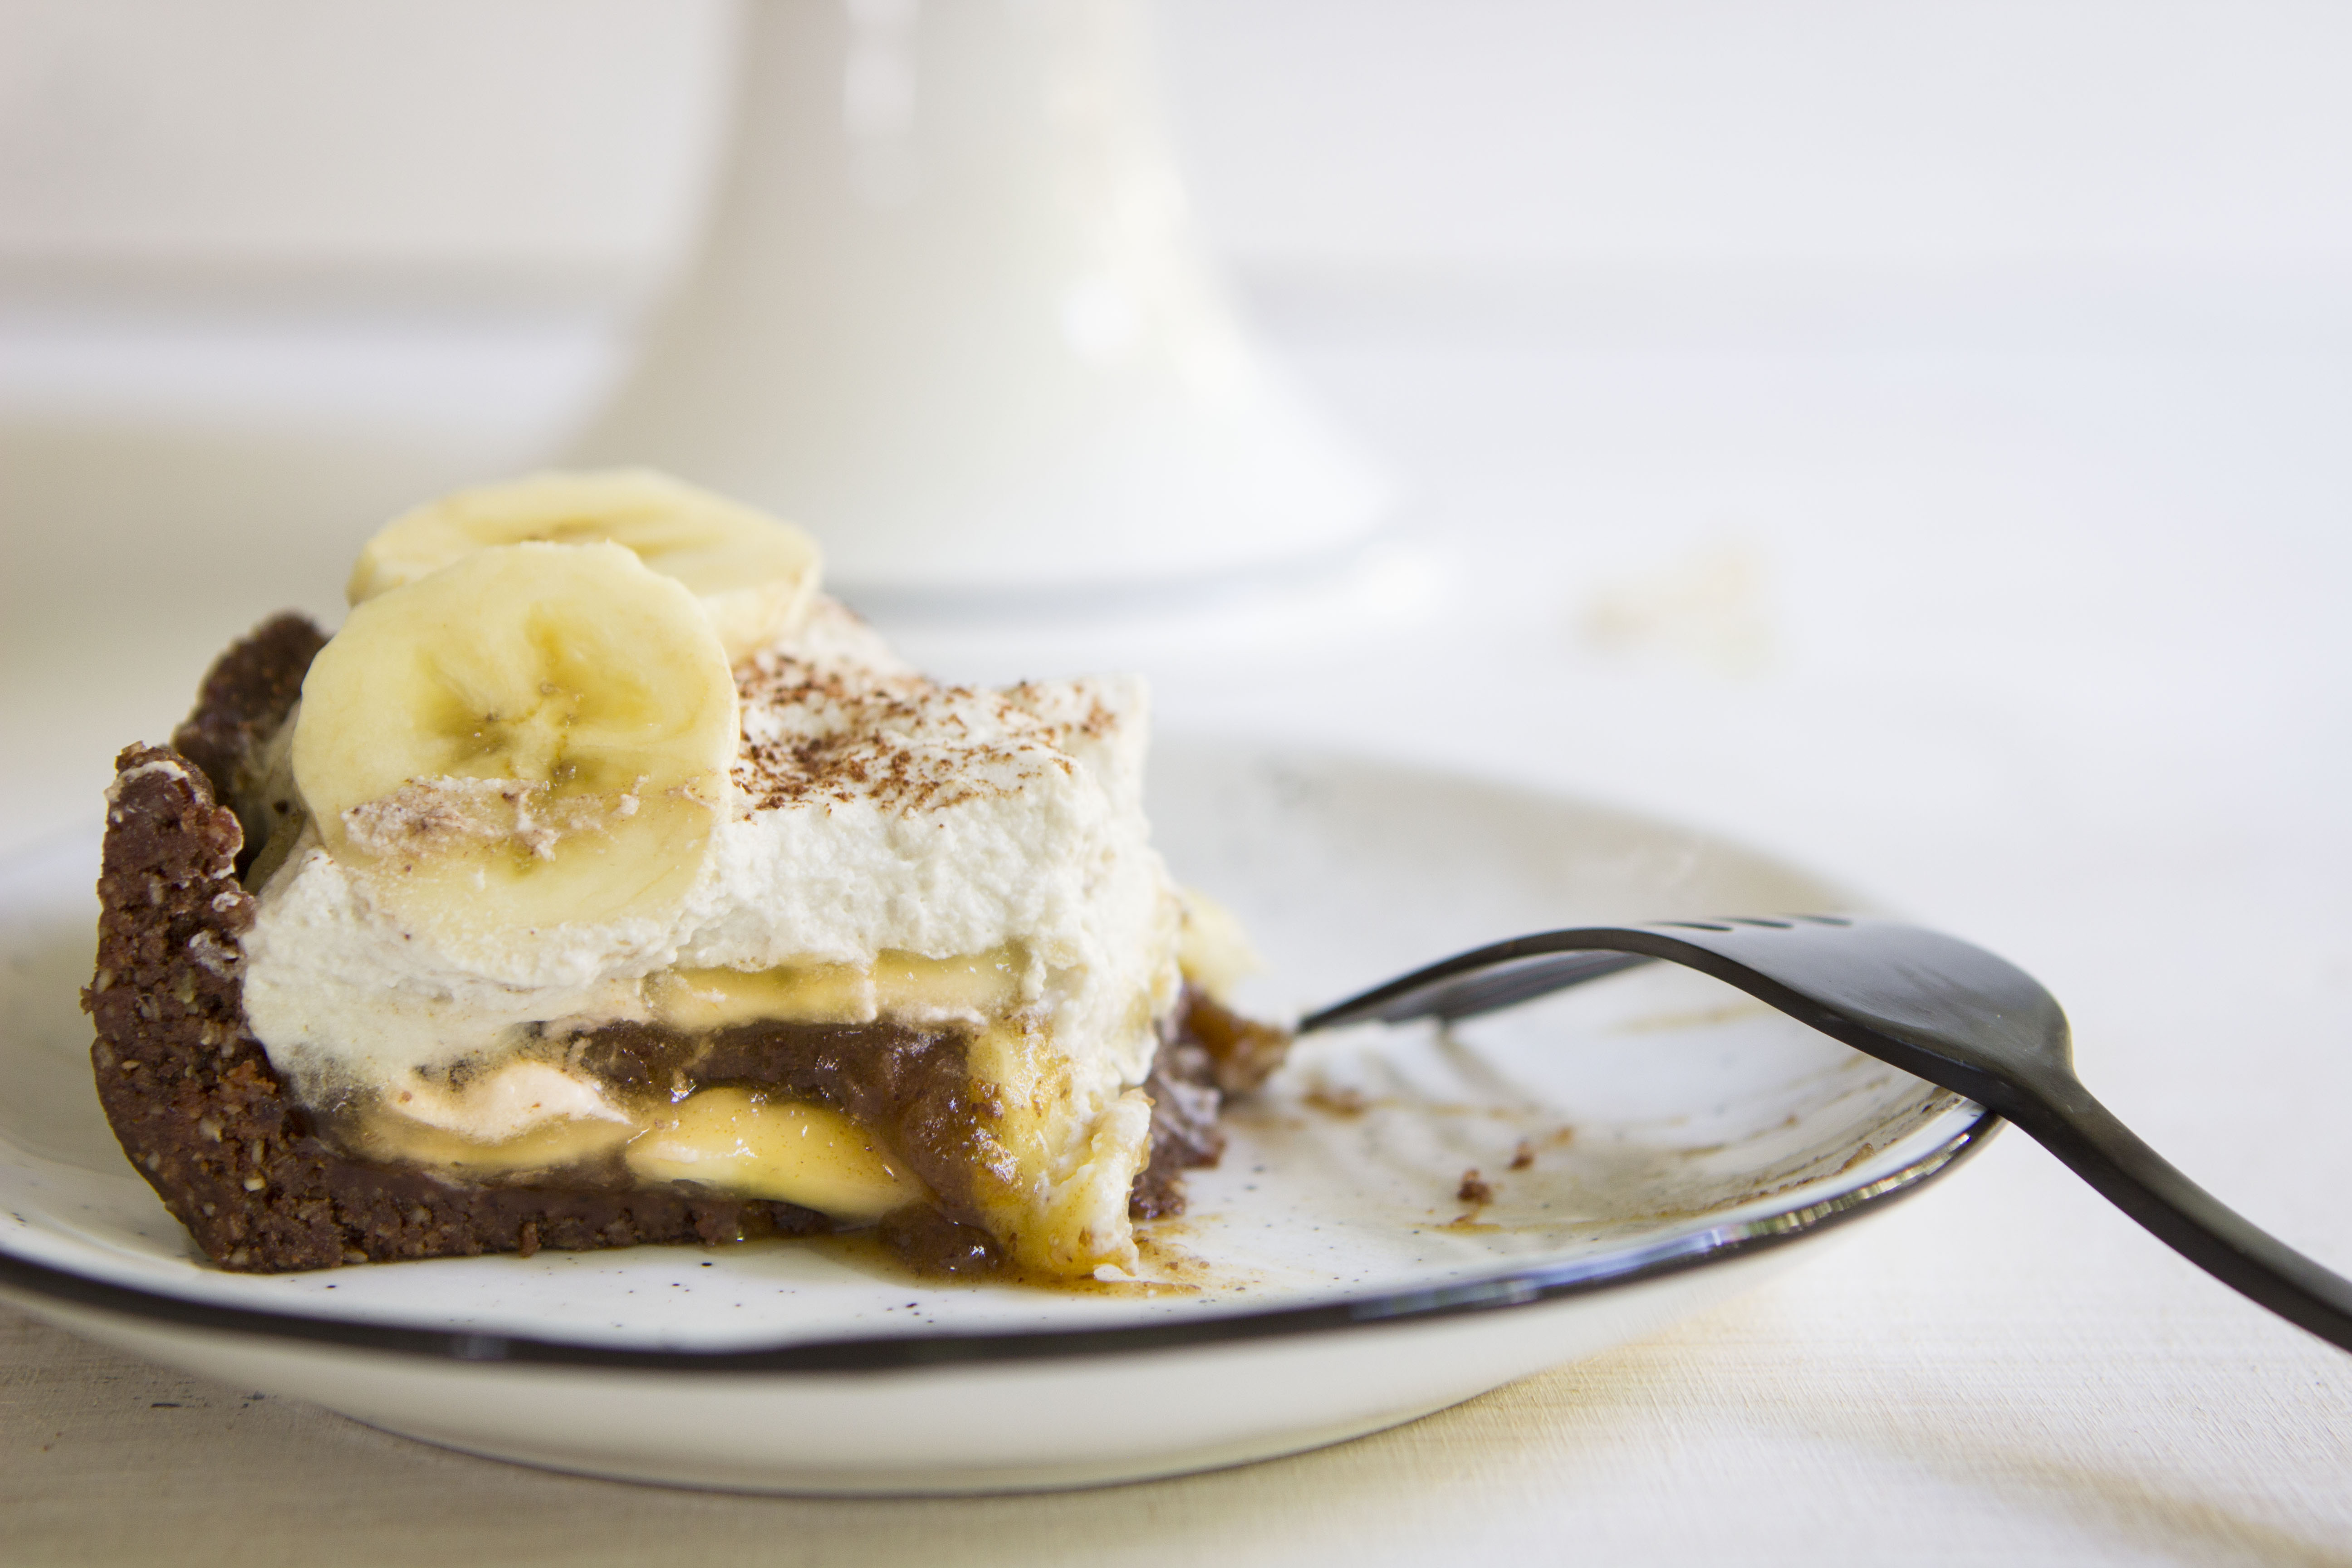 A decadent chocolate, coconut, caramel and banana tart (banoffee pie) that just so happens to be vegan.